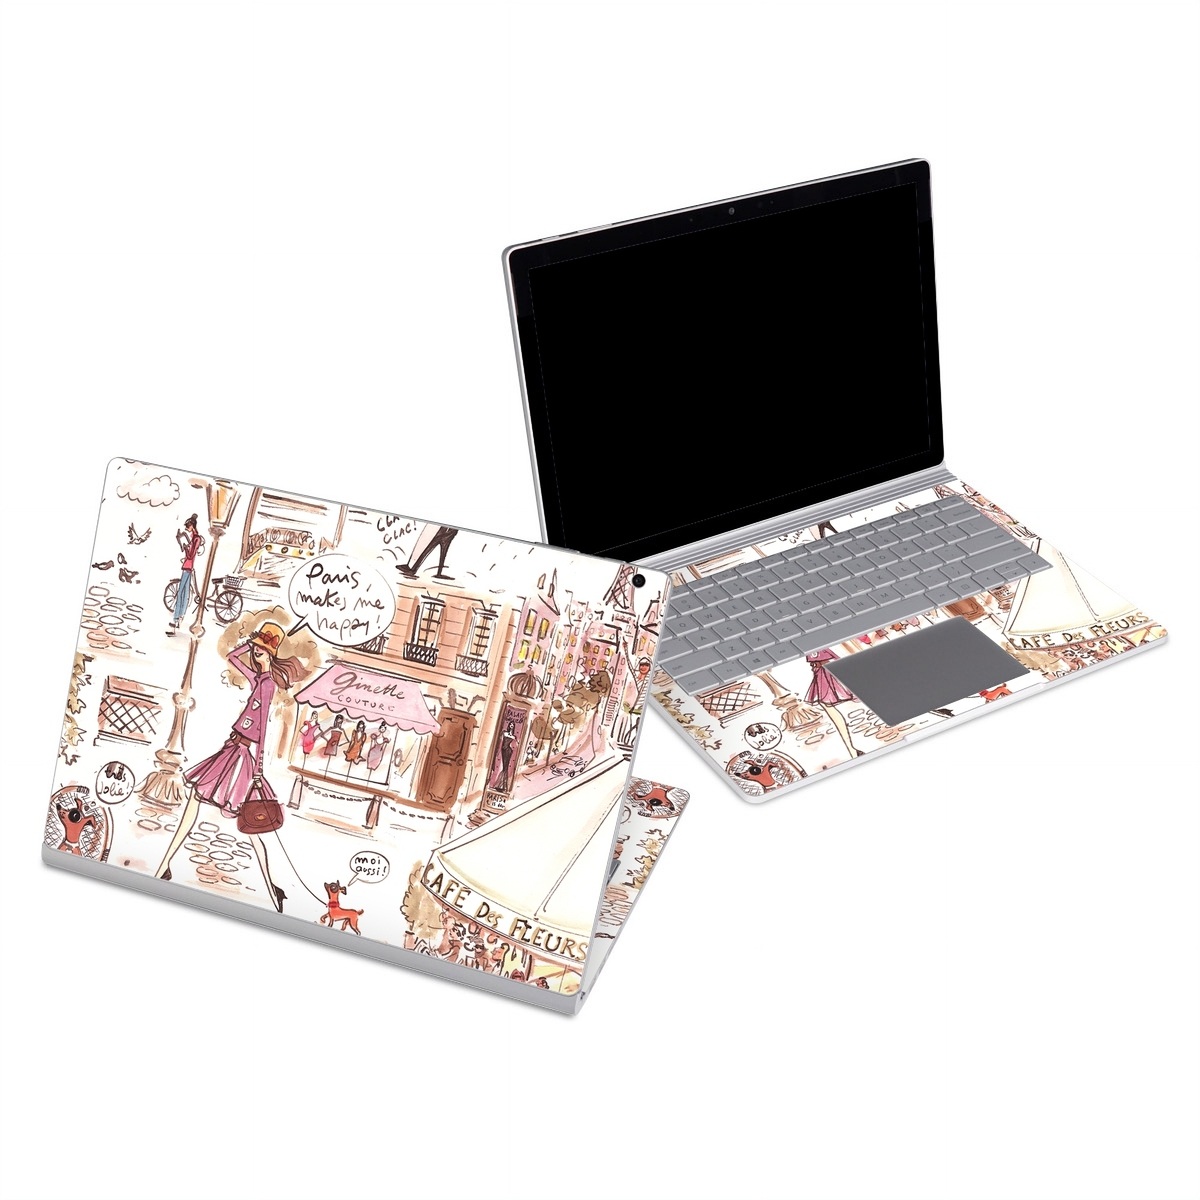 Microsoft Surface Book Series Skin design of Cartoon, Illustration, Comic book, Fiction, Comics, Art, Human, Organism, Fictional character, Style, with gray, white, pink, red, yellow, green colors